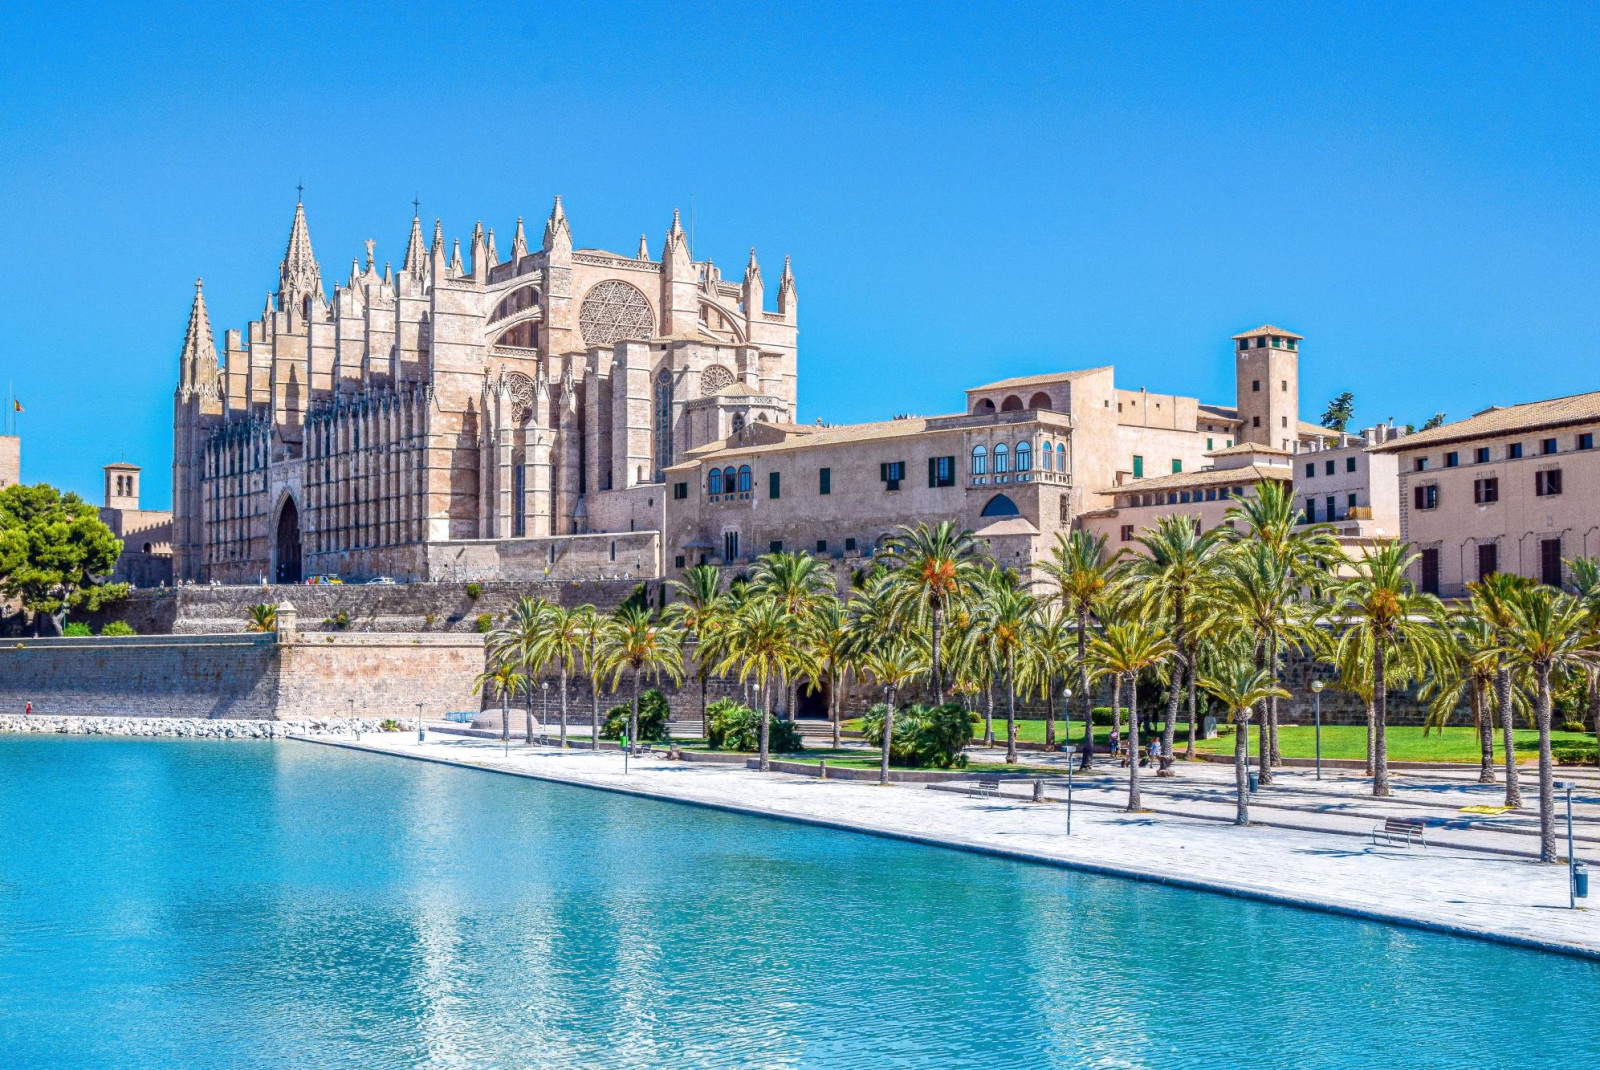 Catedral de Santa María de Palma de Mallorca on a sunny day next to serene body of water and palm trees along clean and paved walkway. 